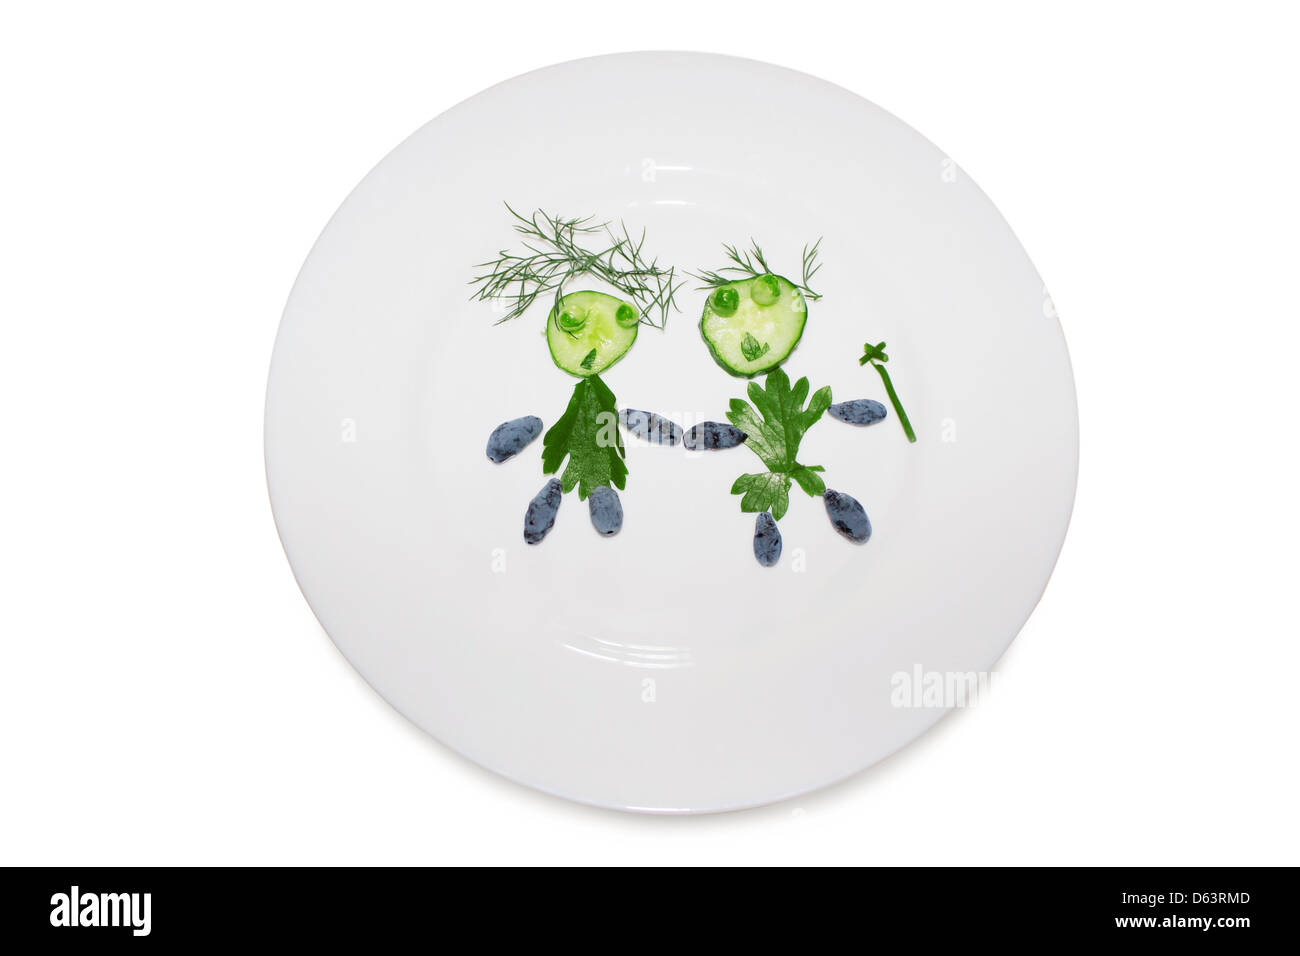 Child silhoutte from cucumber at plate 4154 Stock Photo